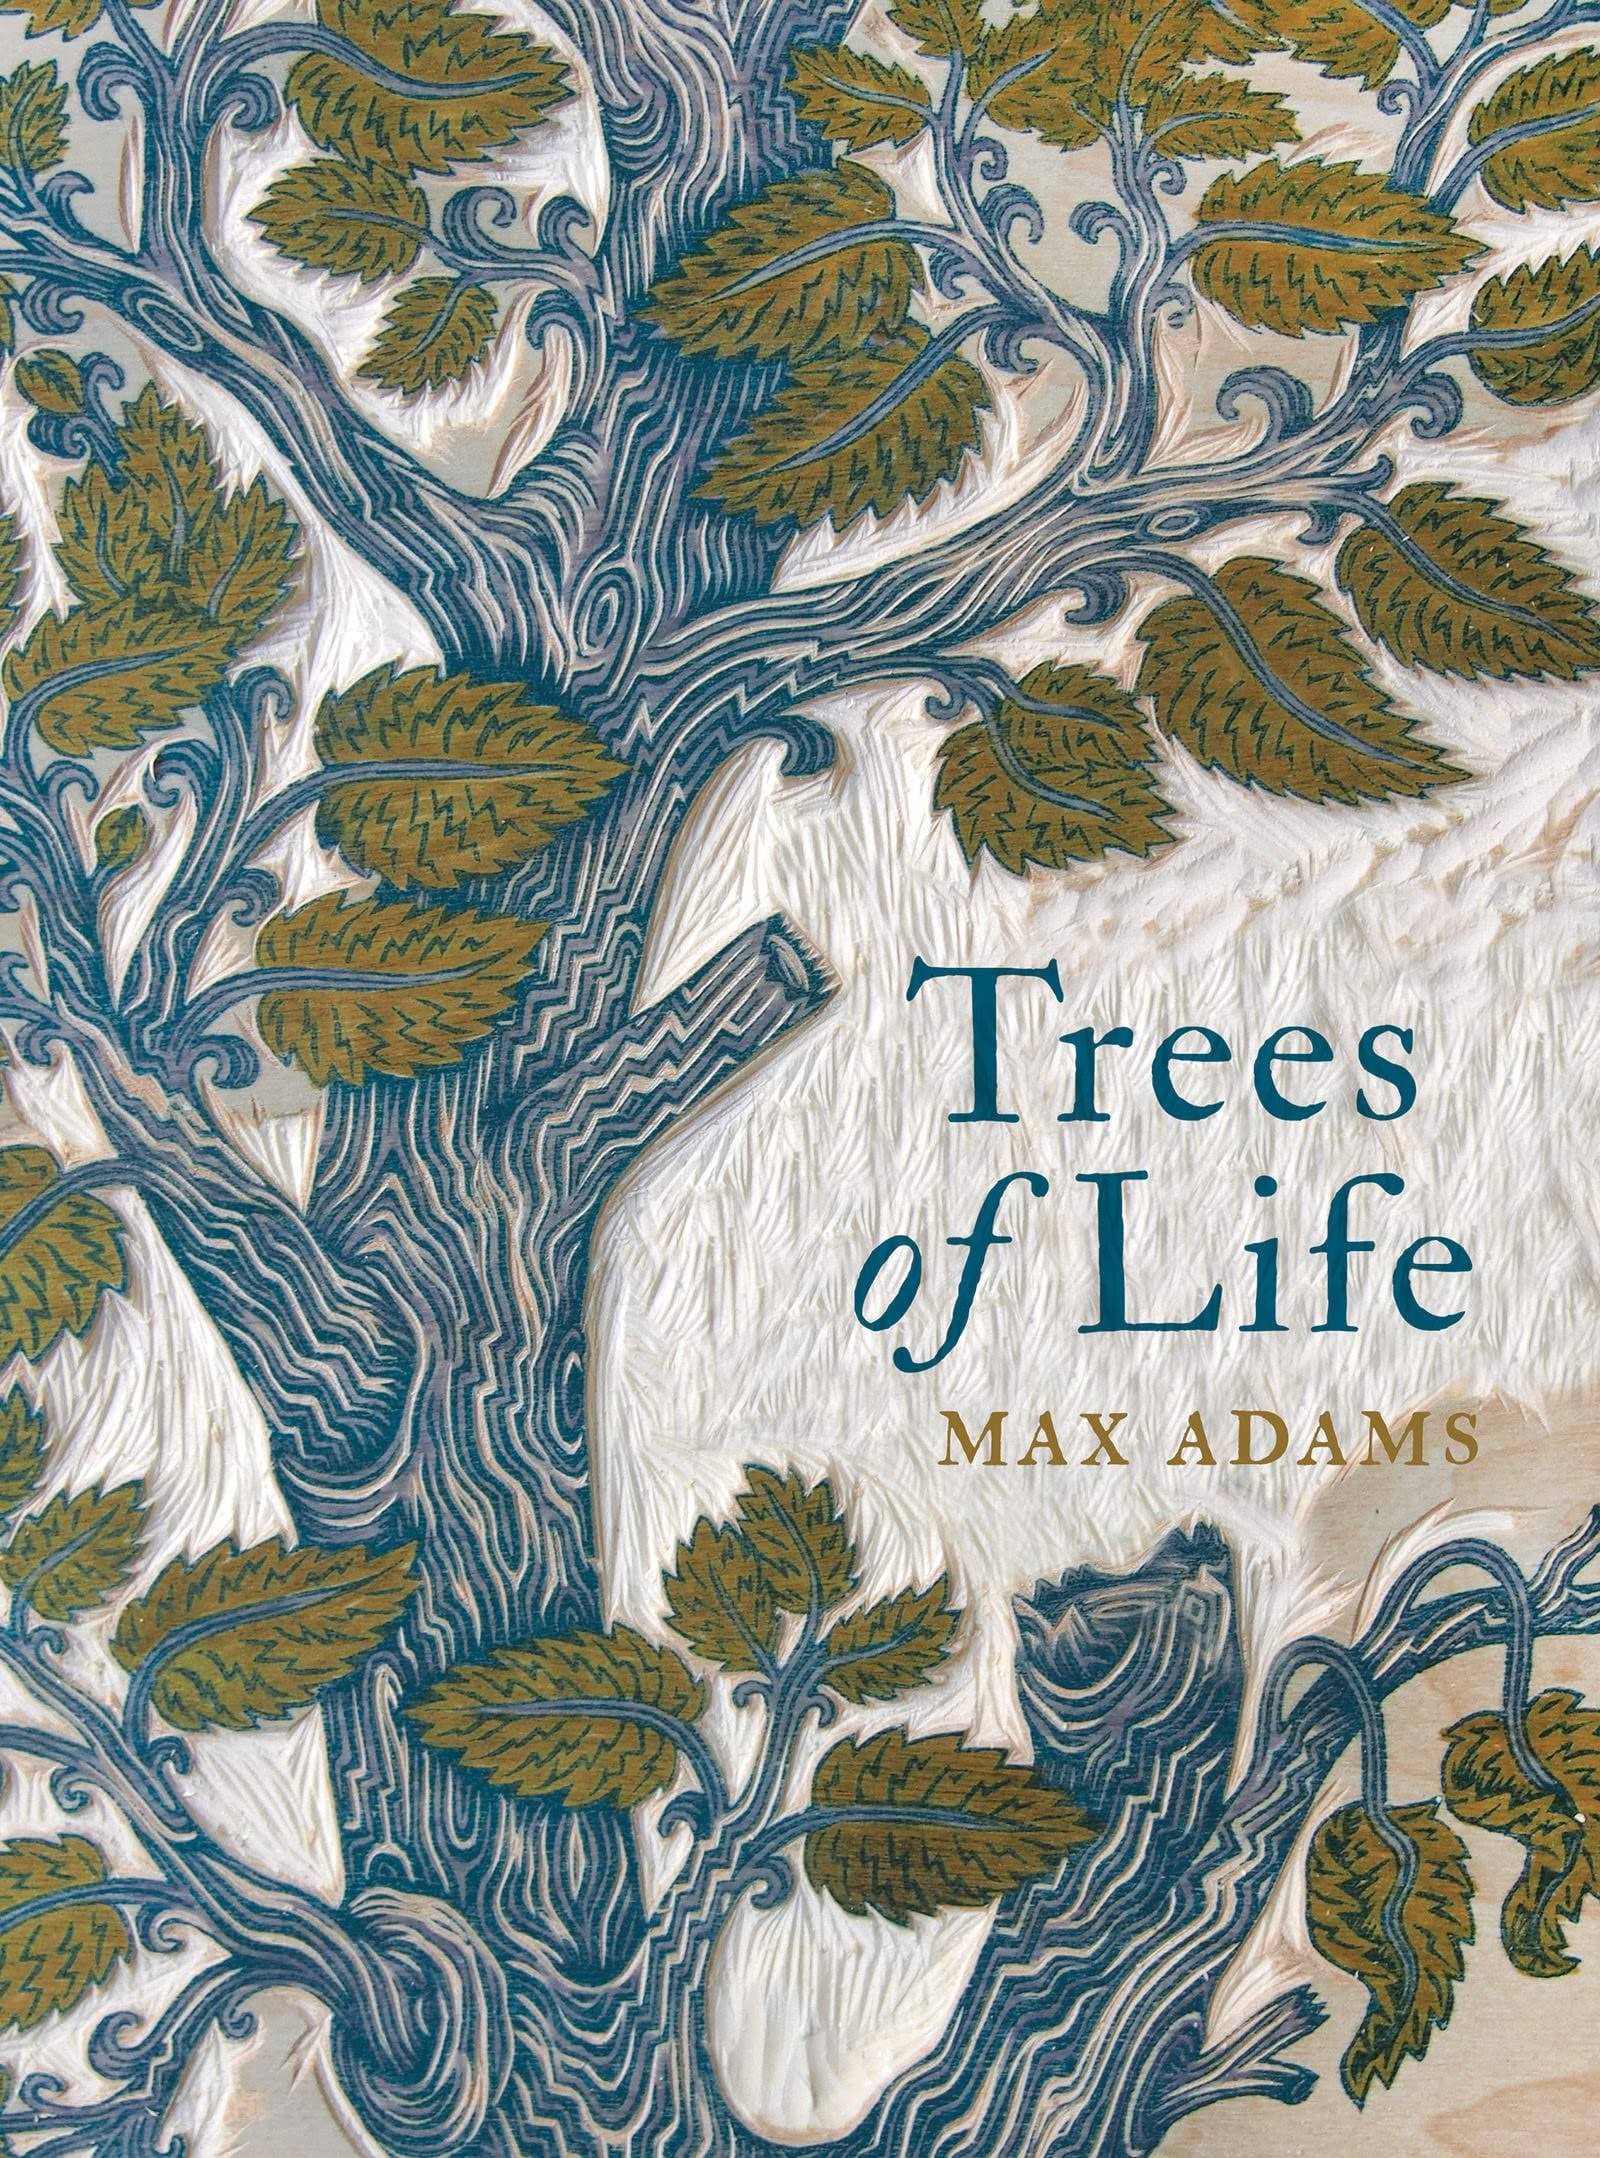 Trees of Life by Max Adams